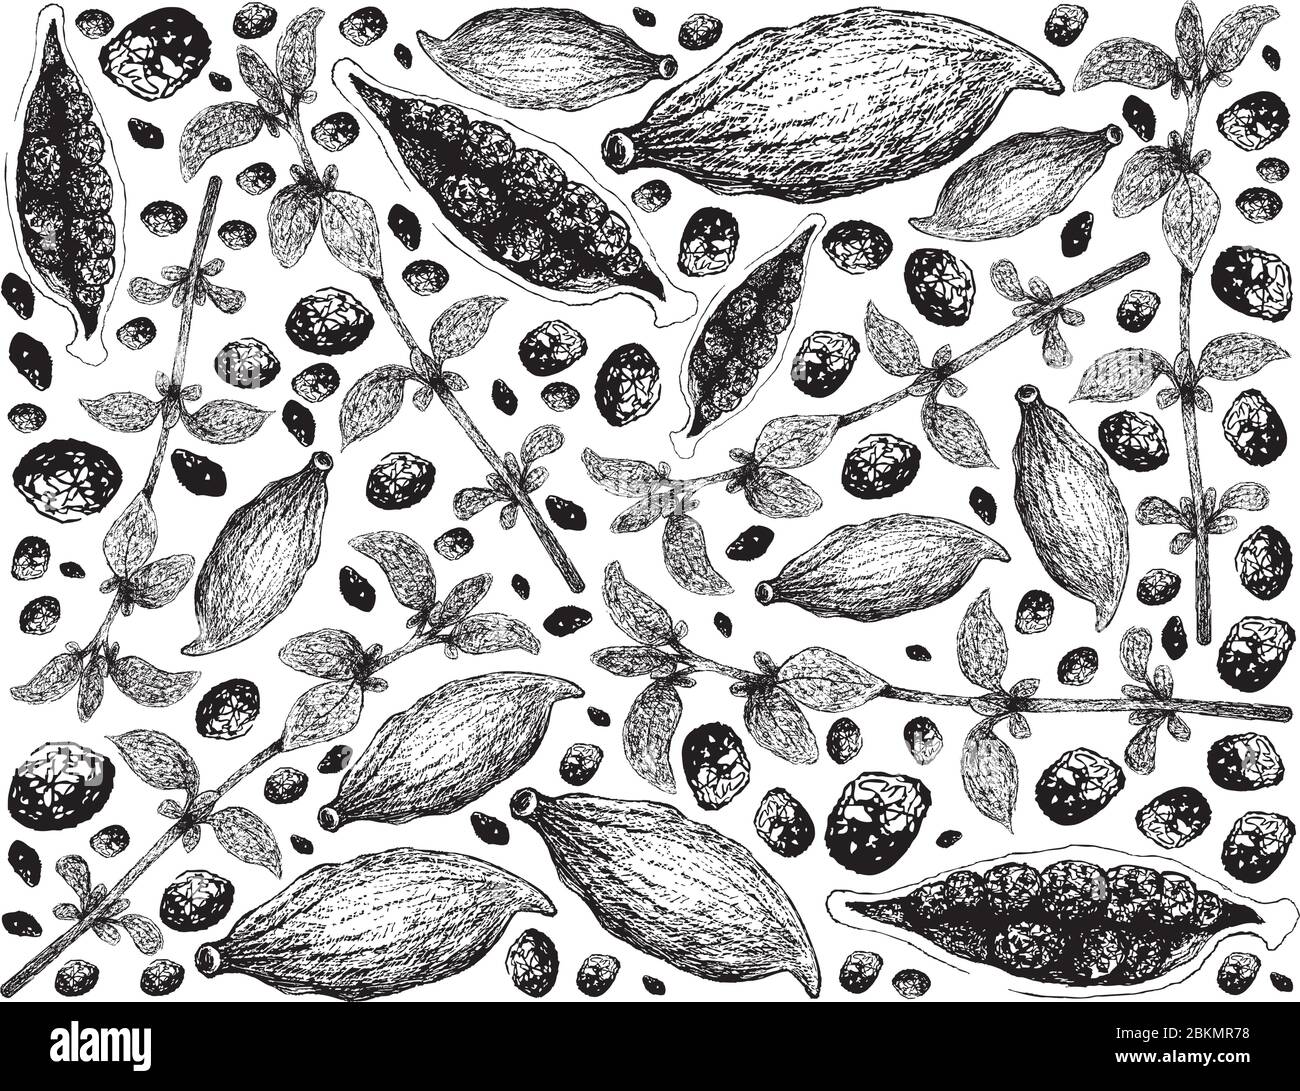 Herbal Plants, Hand Drawn Illustration of Fresh Thyme and Cardamom Pods Isolated on A White Background Used for Seasoning in Cooking. Stock Vector